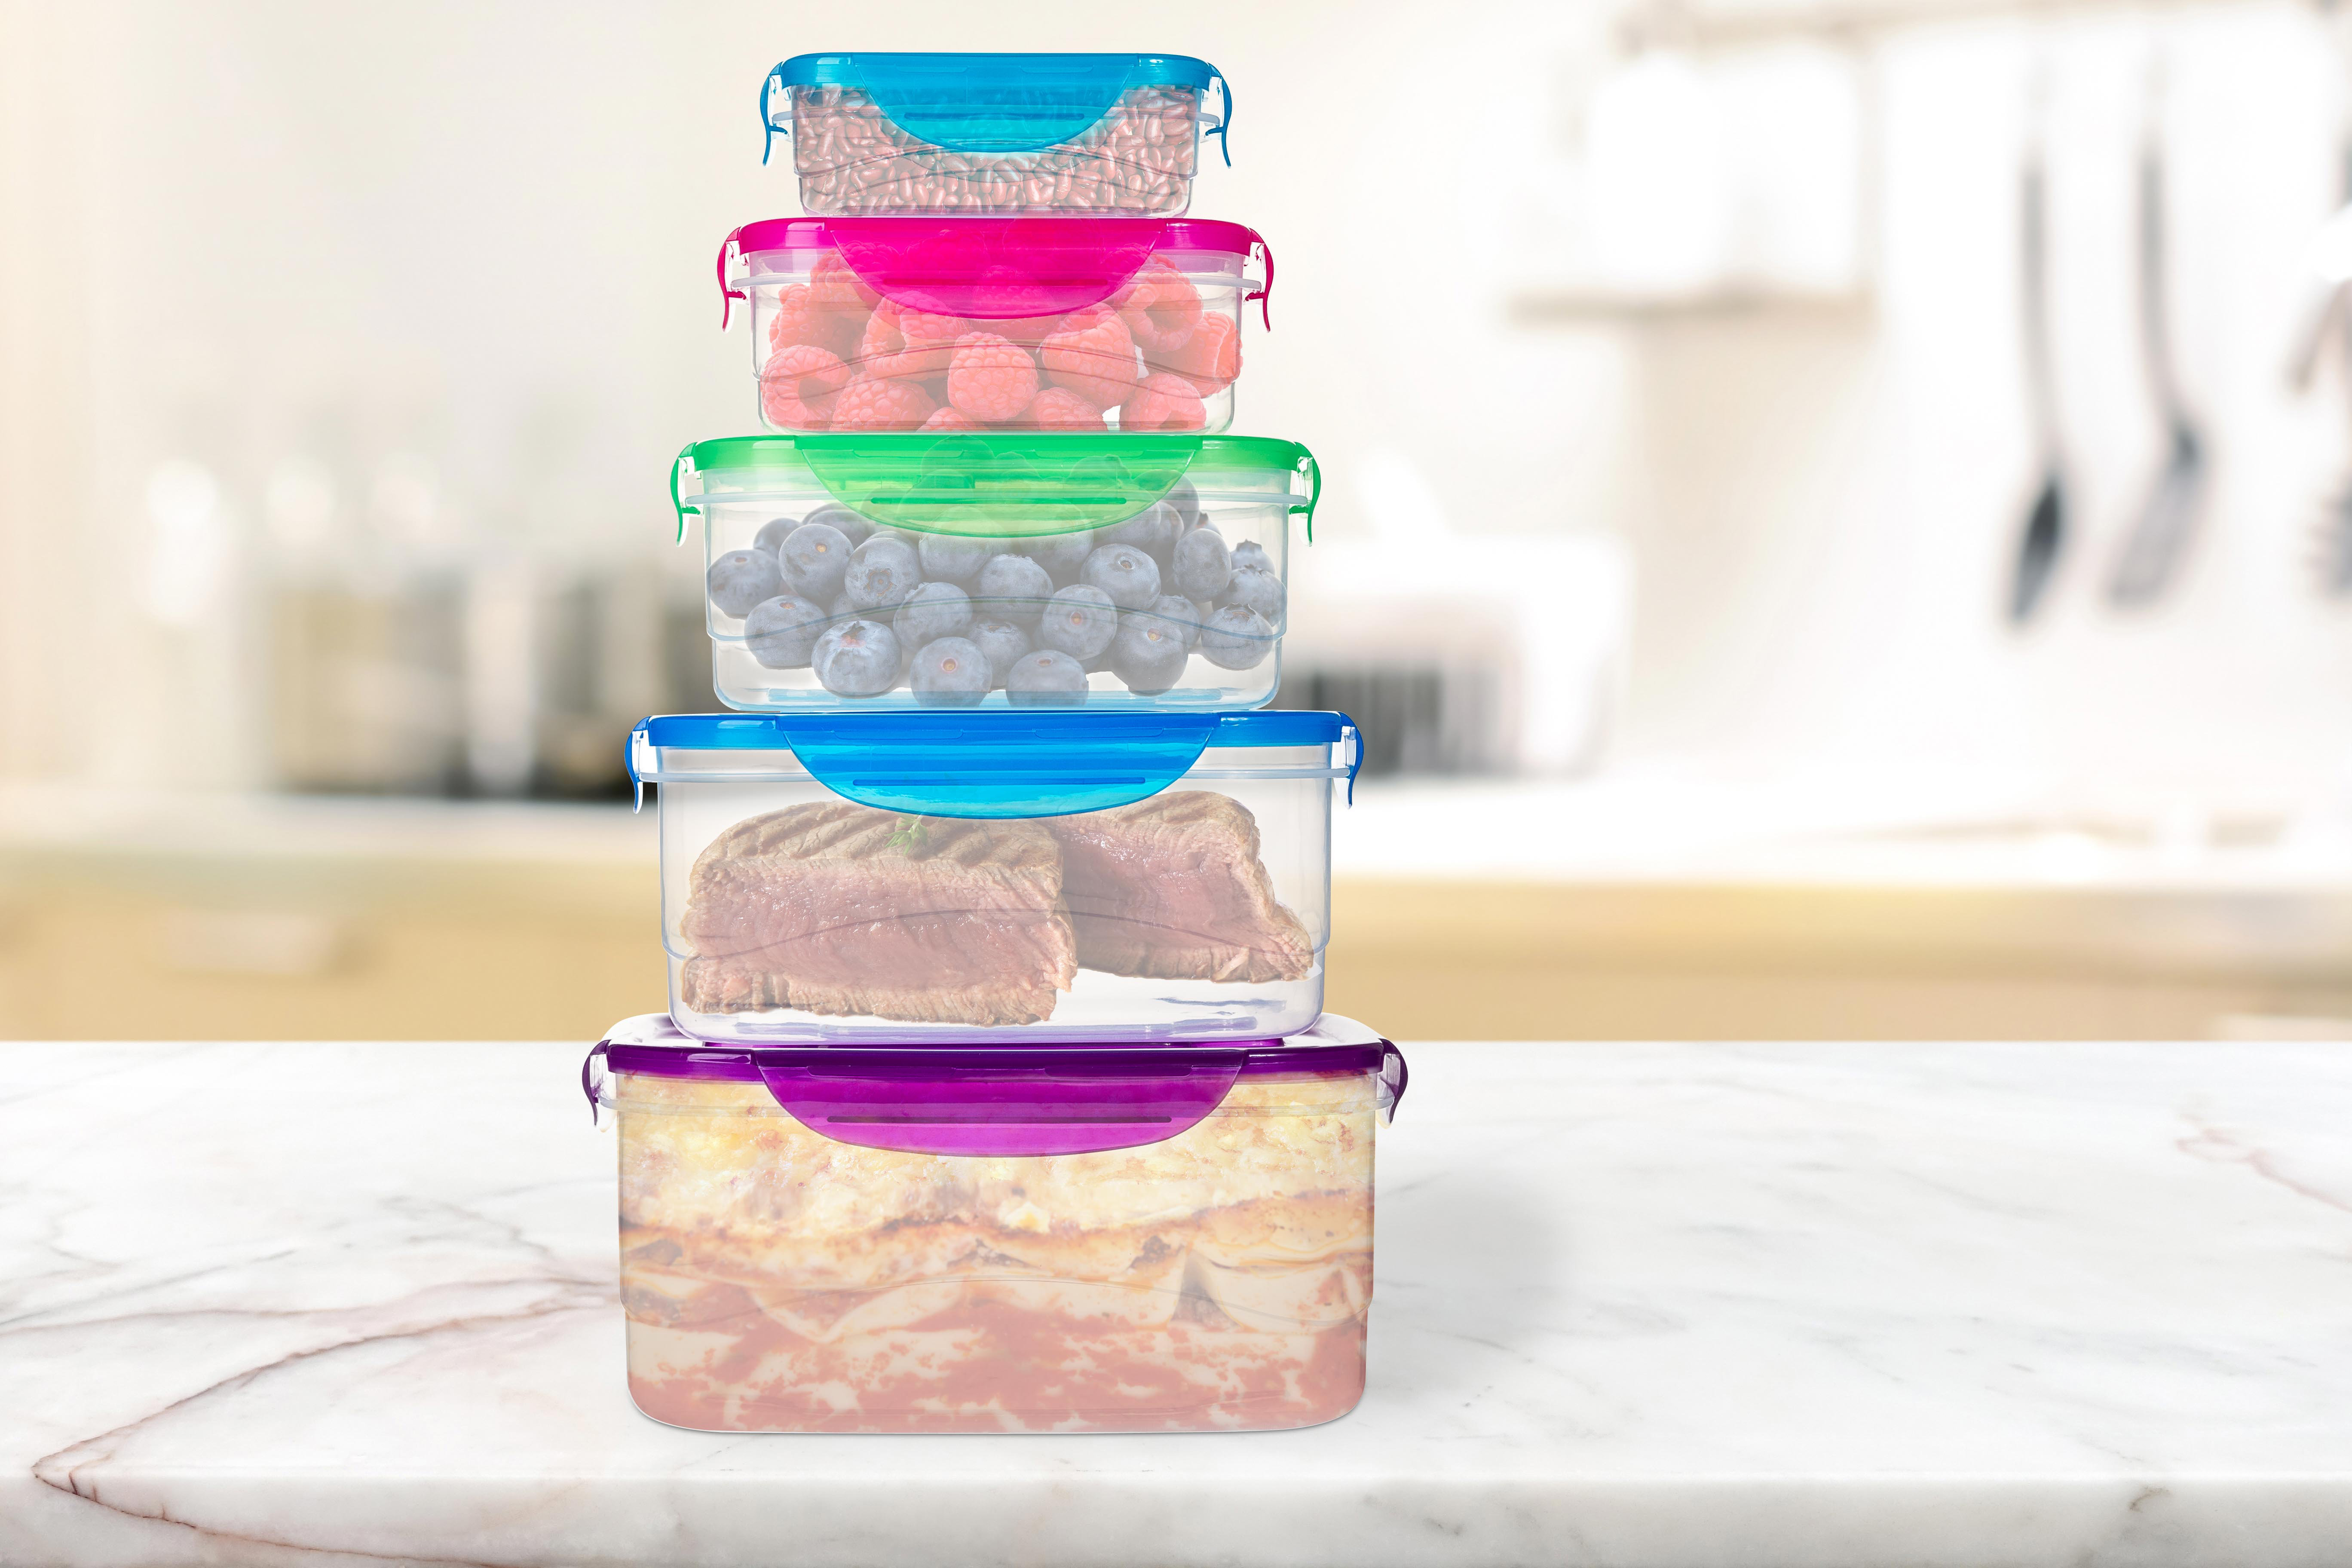 Durable Meal Prep Plastic Food Containers with Snap Lock Lids by Lexi Home  - 48-pc Set, Blue - Lexi Home